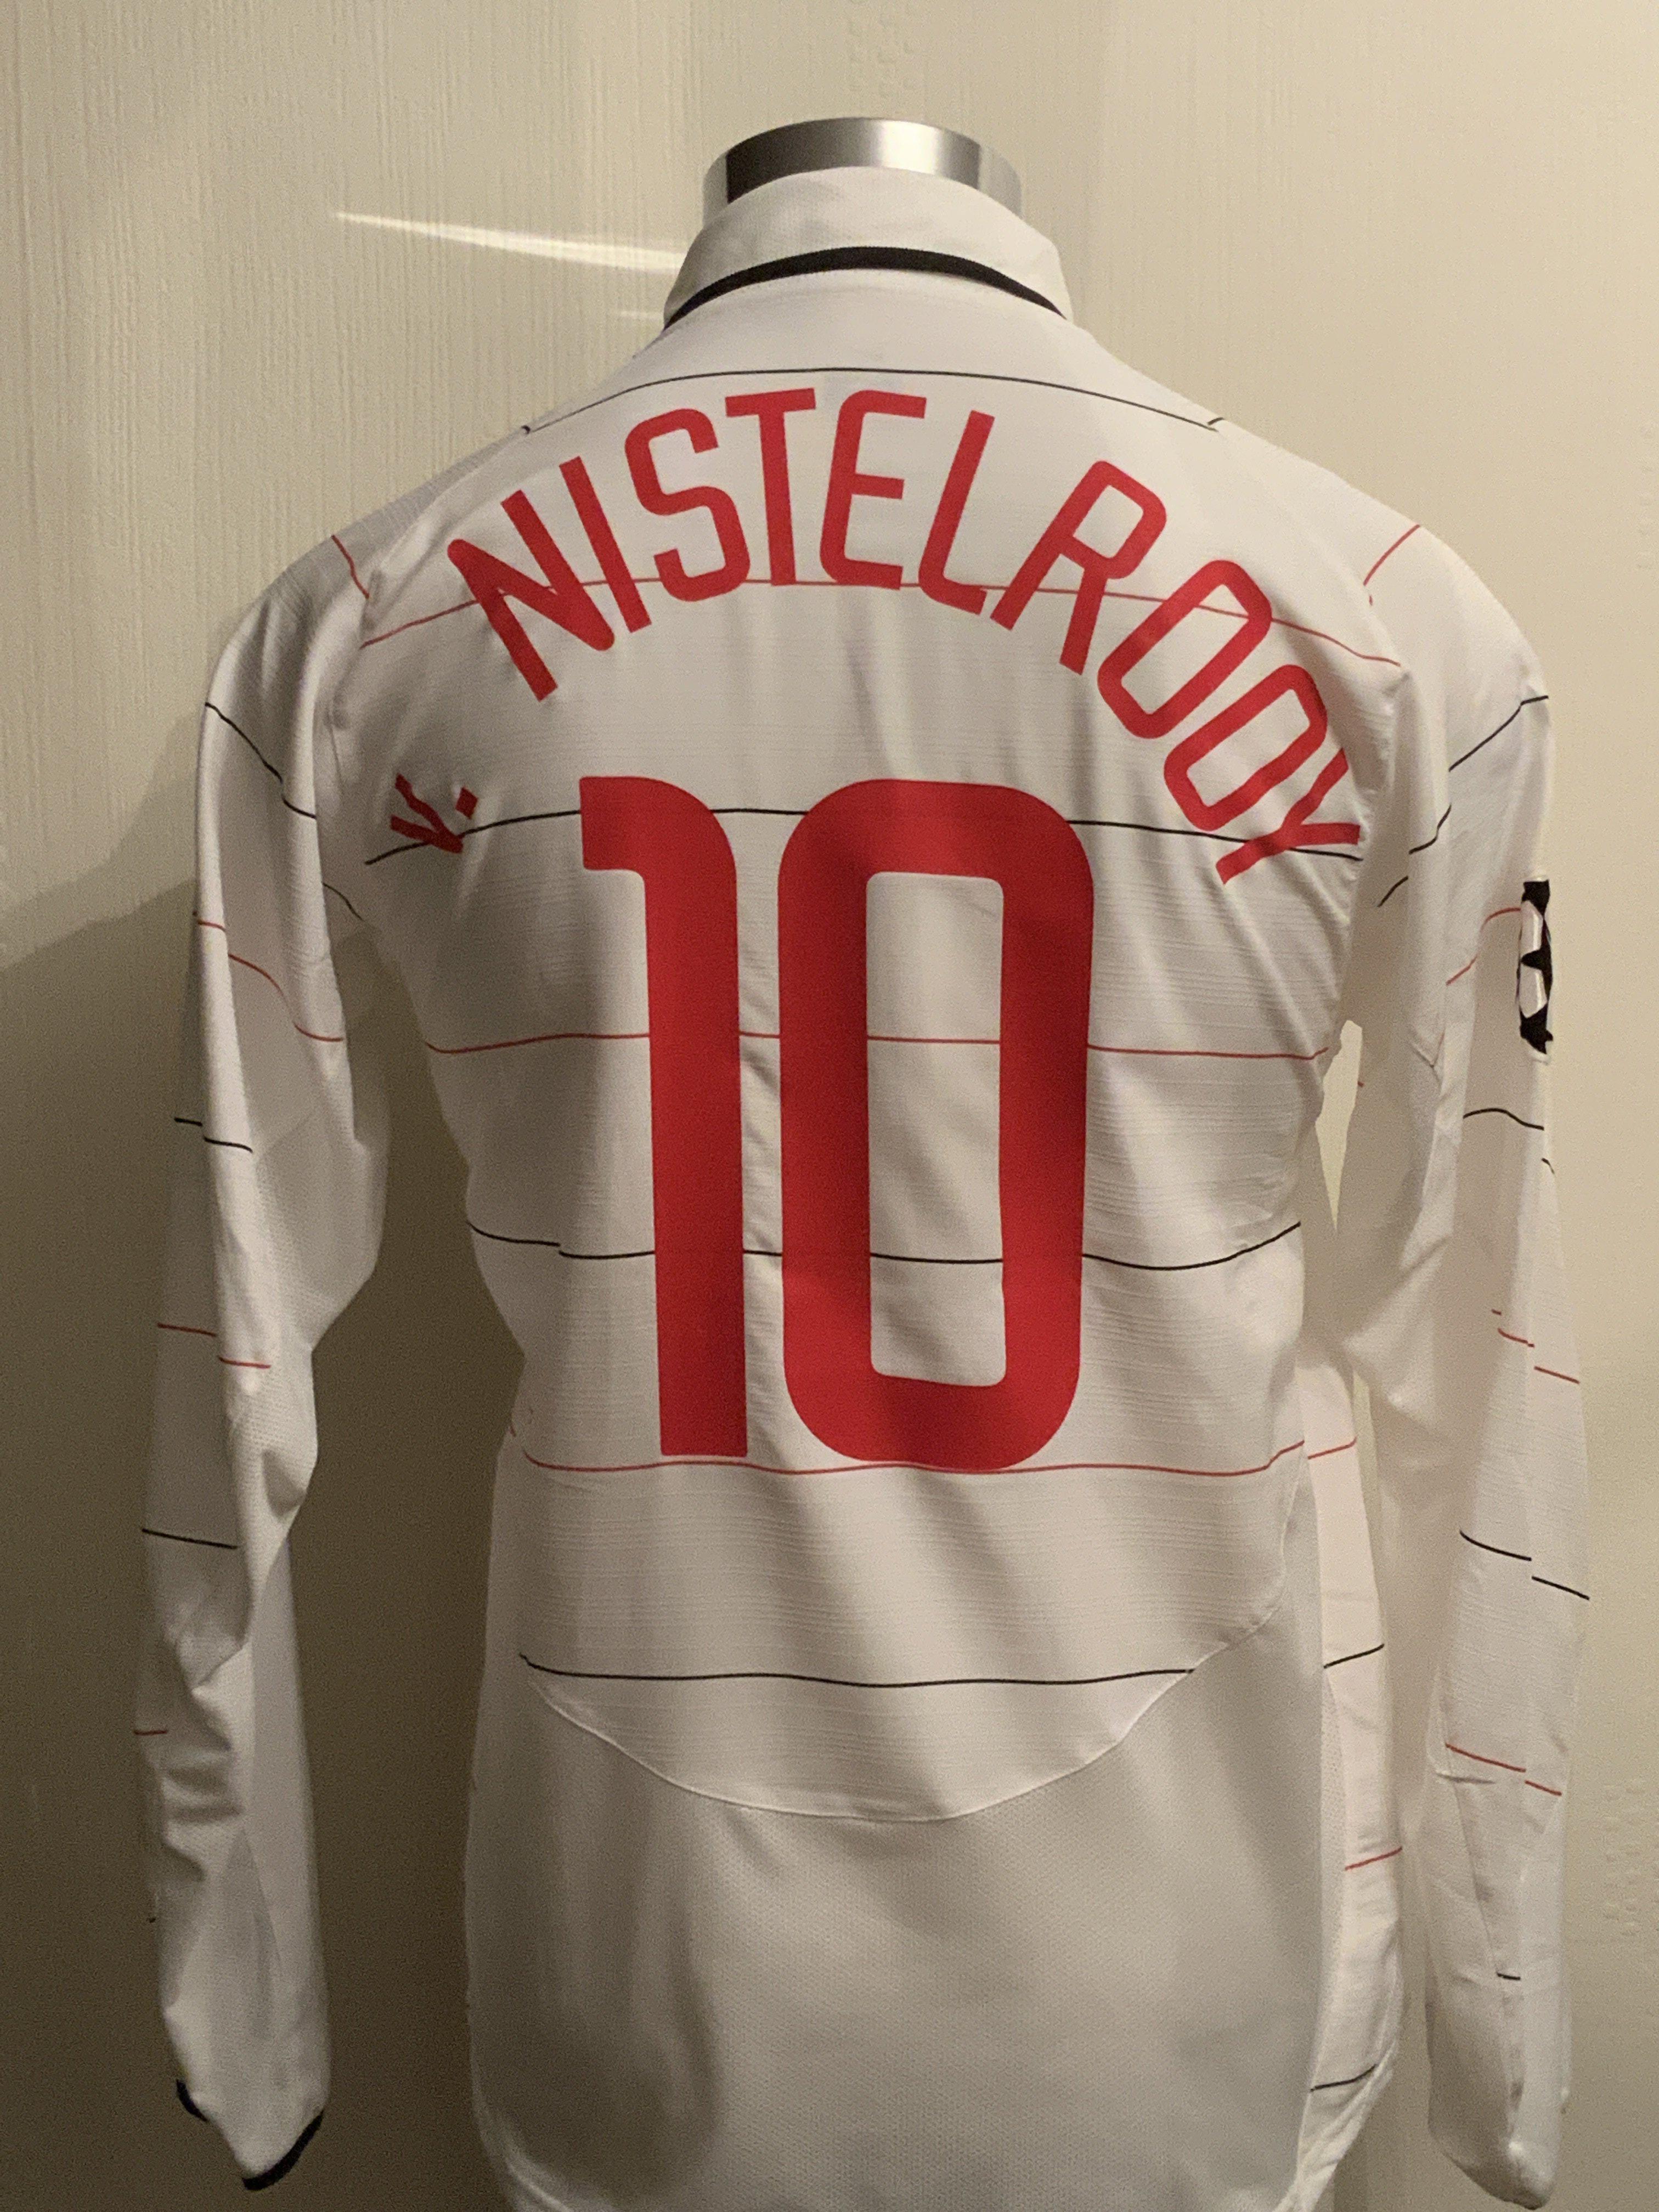 Van Nistelrooy Manchester United Champions League Match Issued Football Shirt: White number 10 short